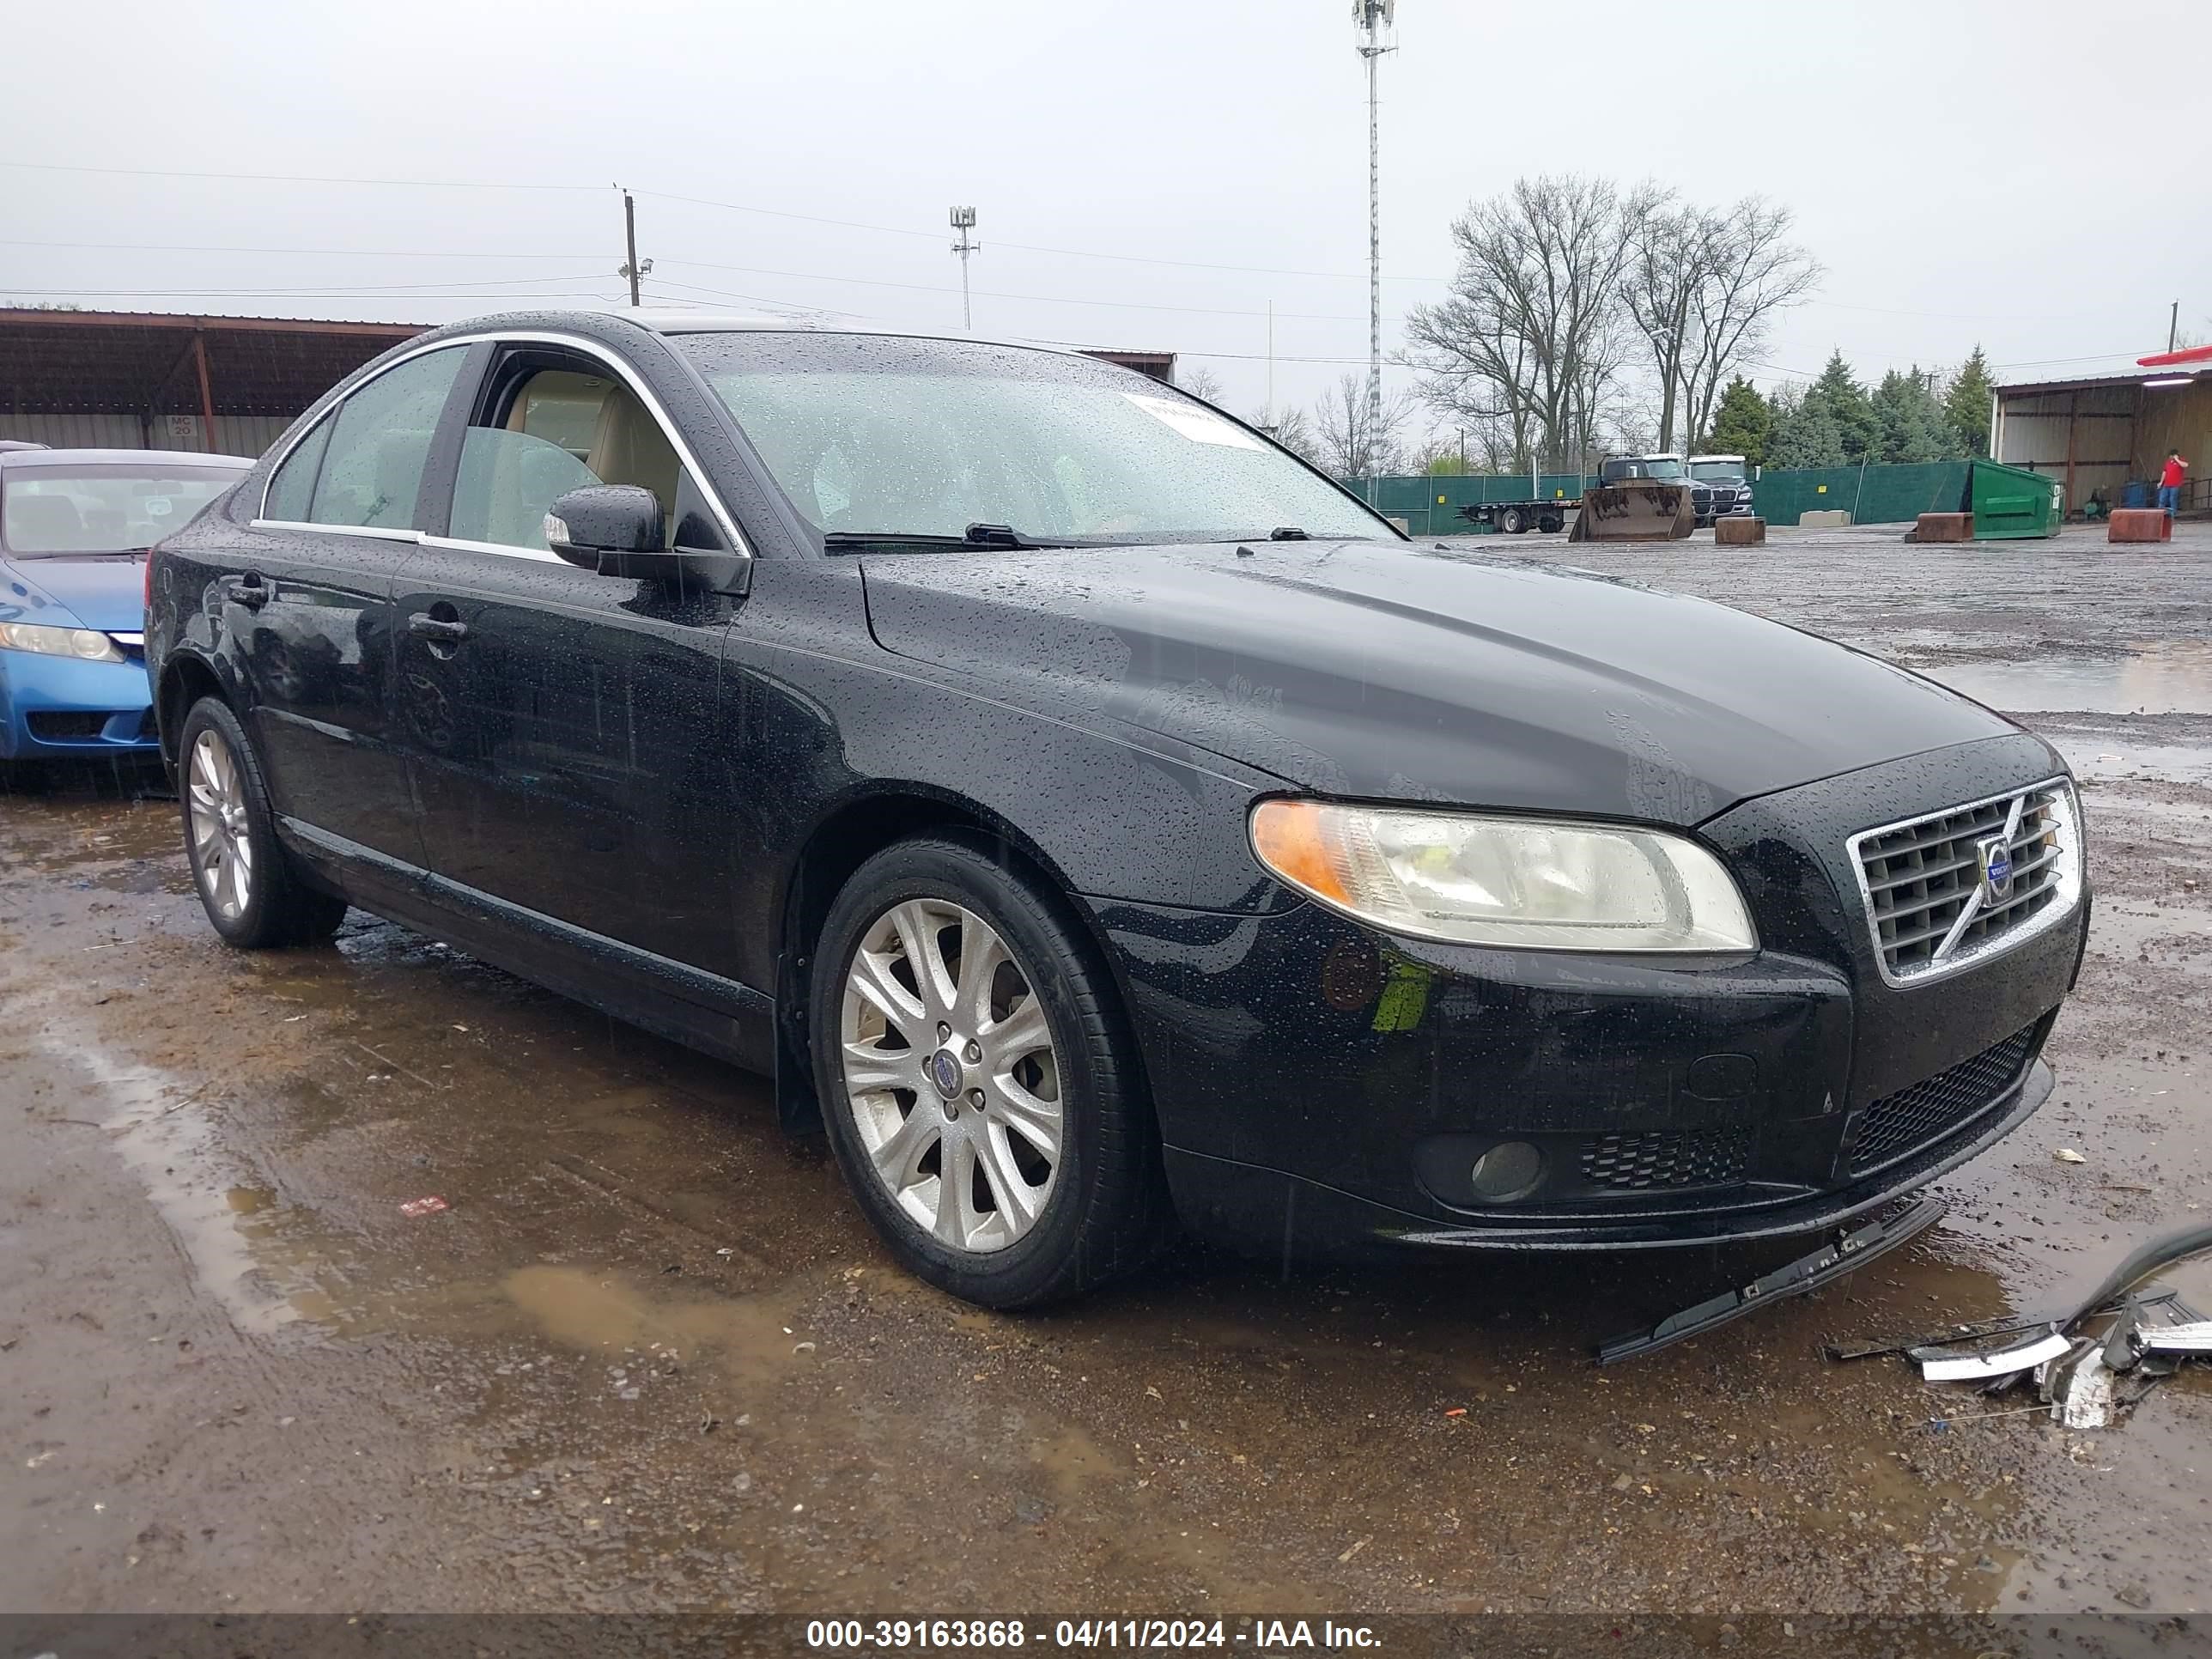 vin: YV1AS982891089505 YV1AS982891089505 2009 volvo s80 3200 for Sale in 43123, 1601 Thrallkill Road, Grove City, Ohio, USA